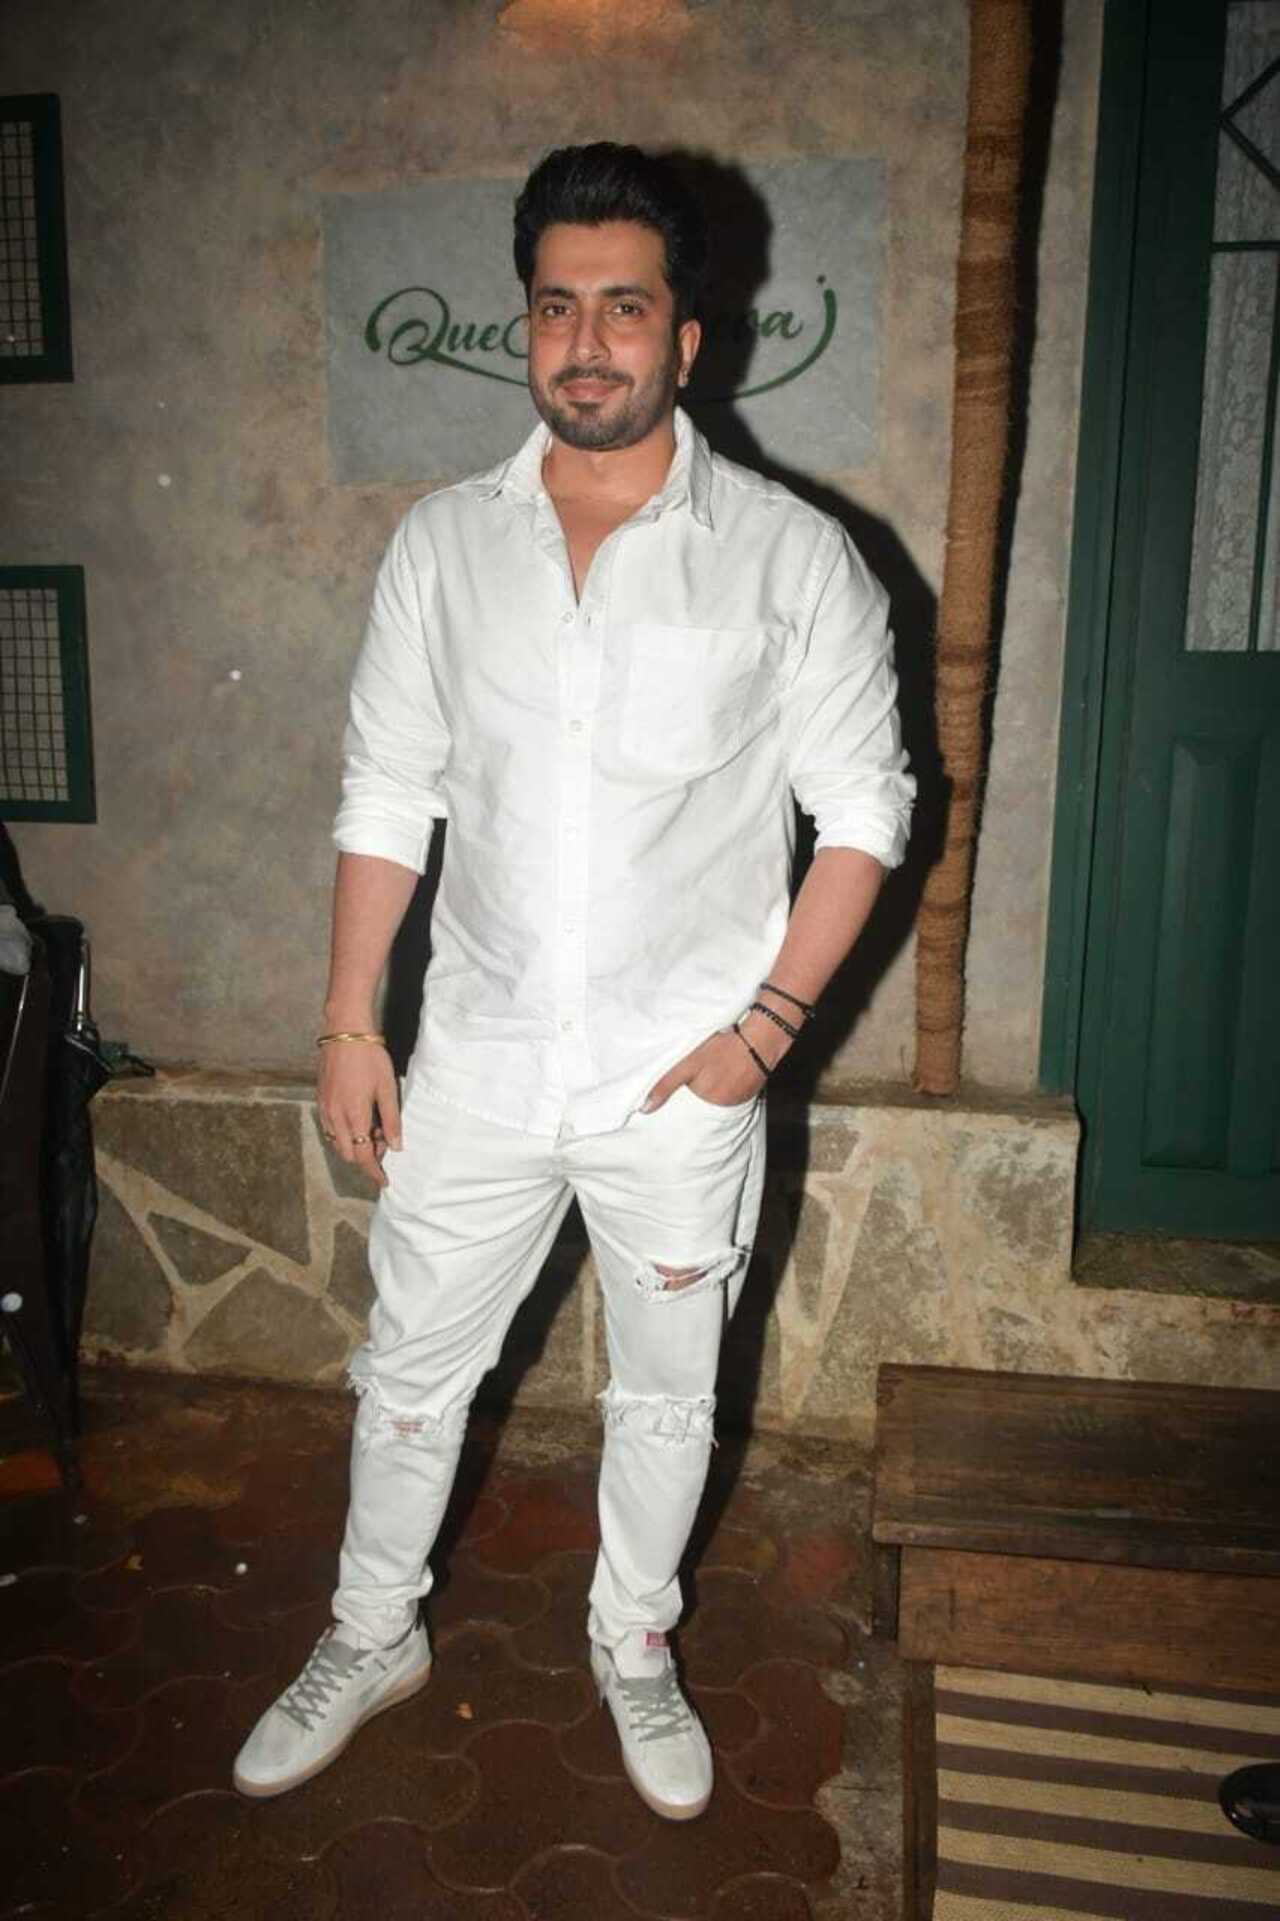 Sunny Singh looked dashing in white jeans and a matching shirt as he attended Huma’s birthday party at Que Sera Sera